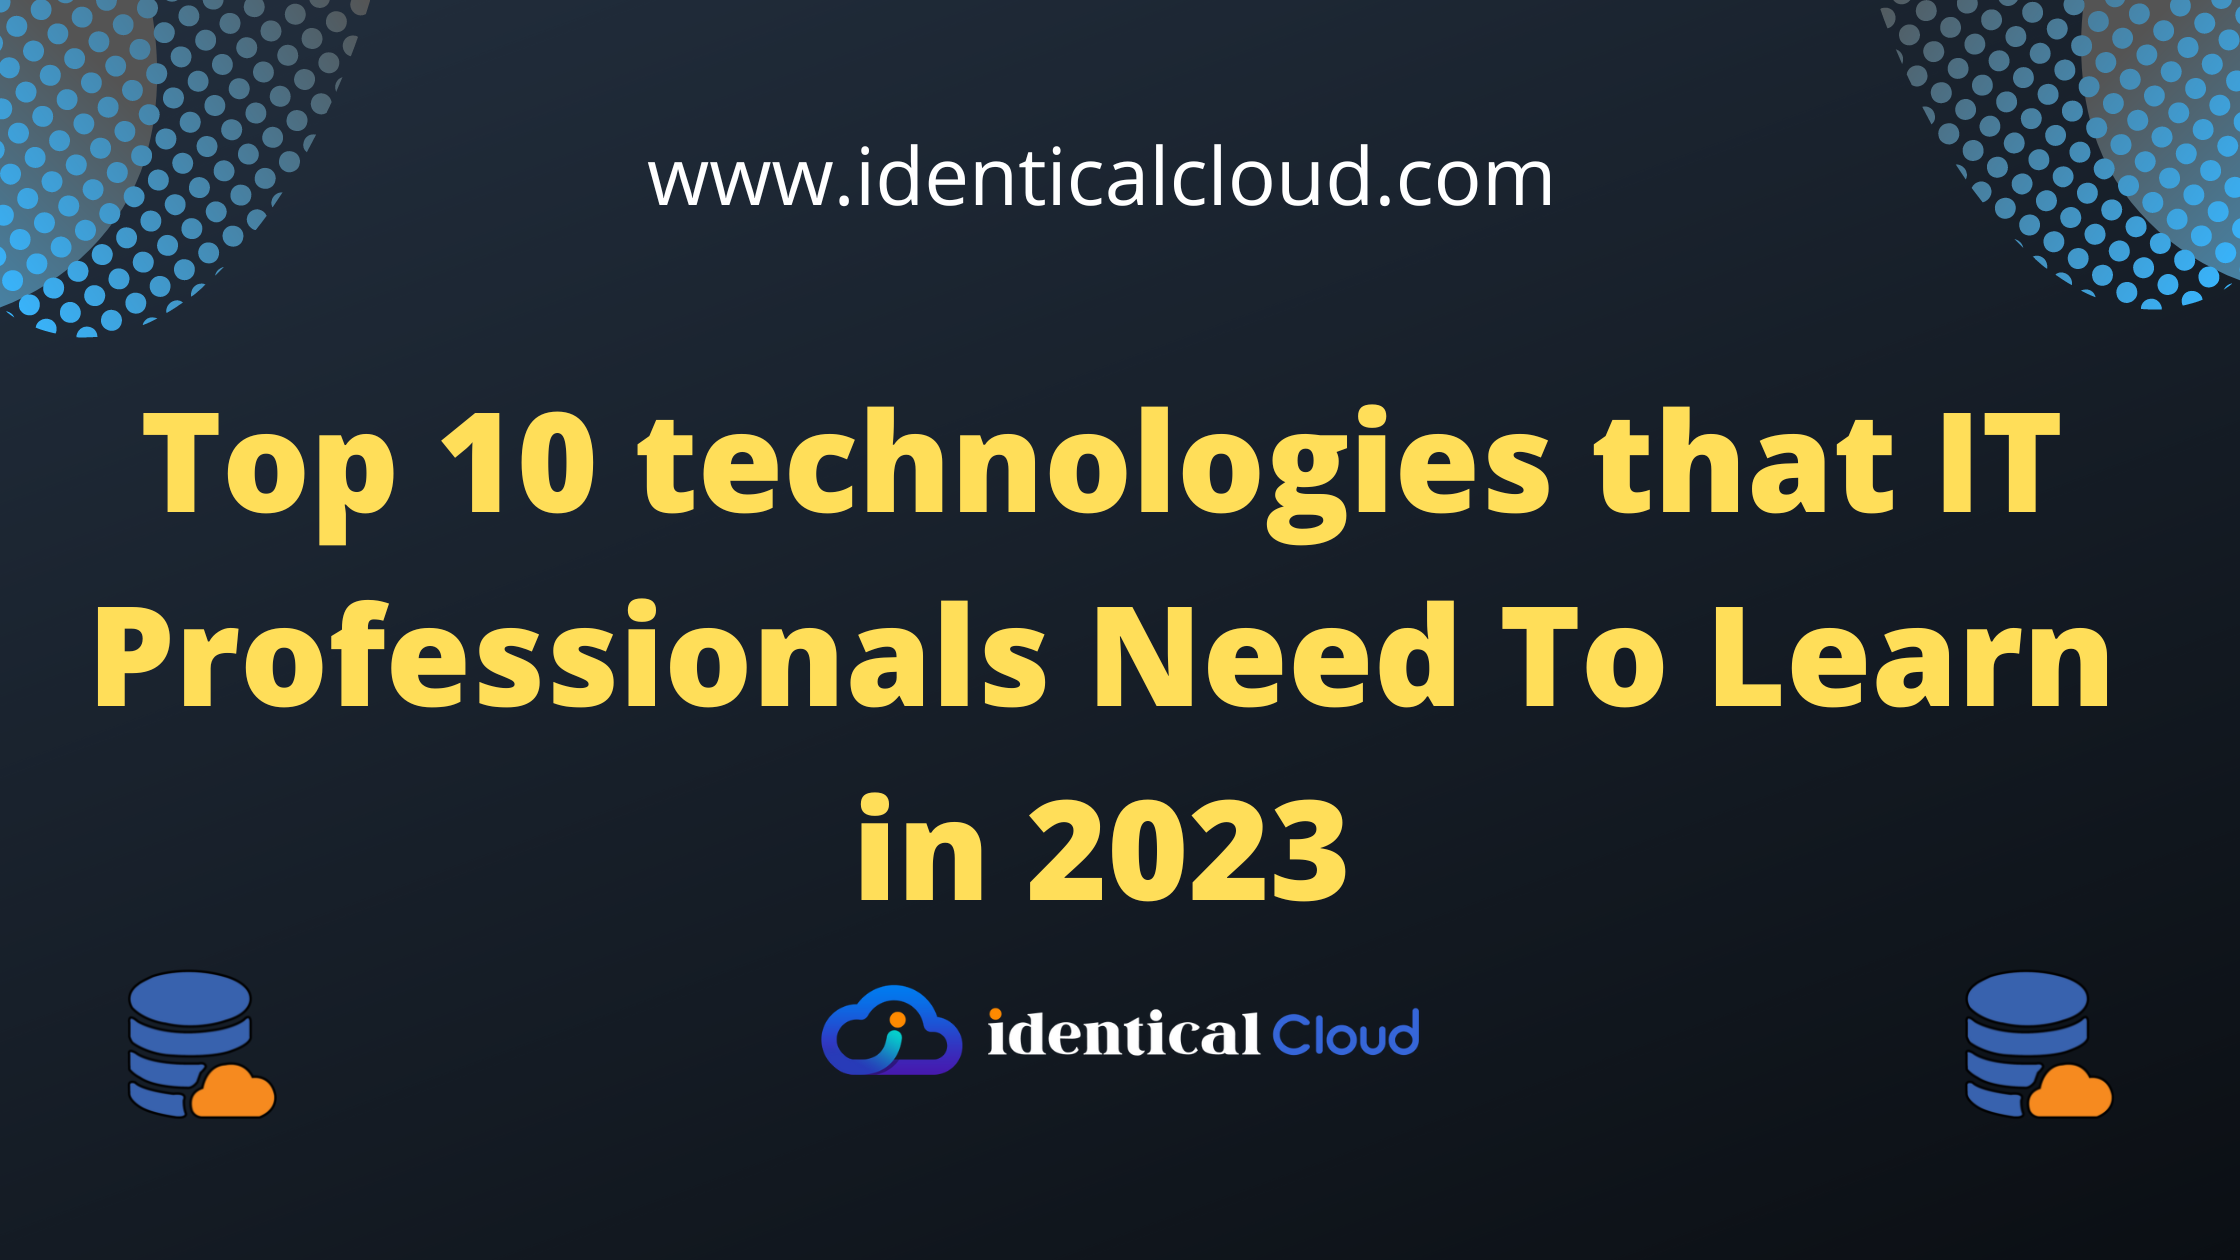 Top 10 technologies that IT Professionals Need To Learn in 2023 - identicalcloud.com